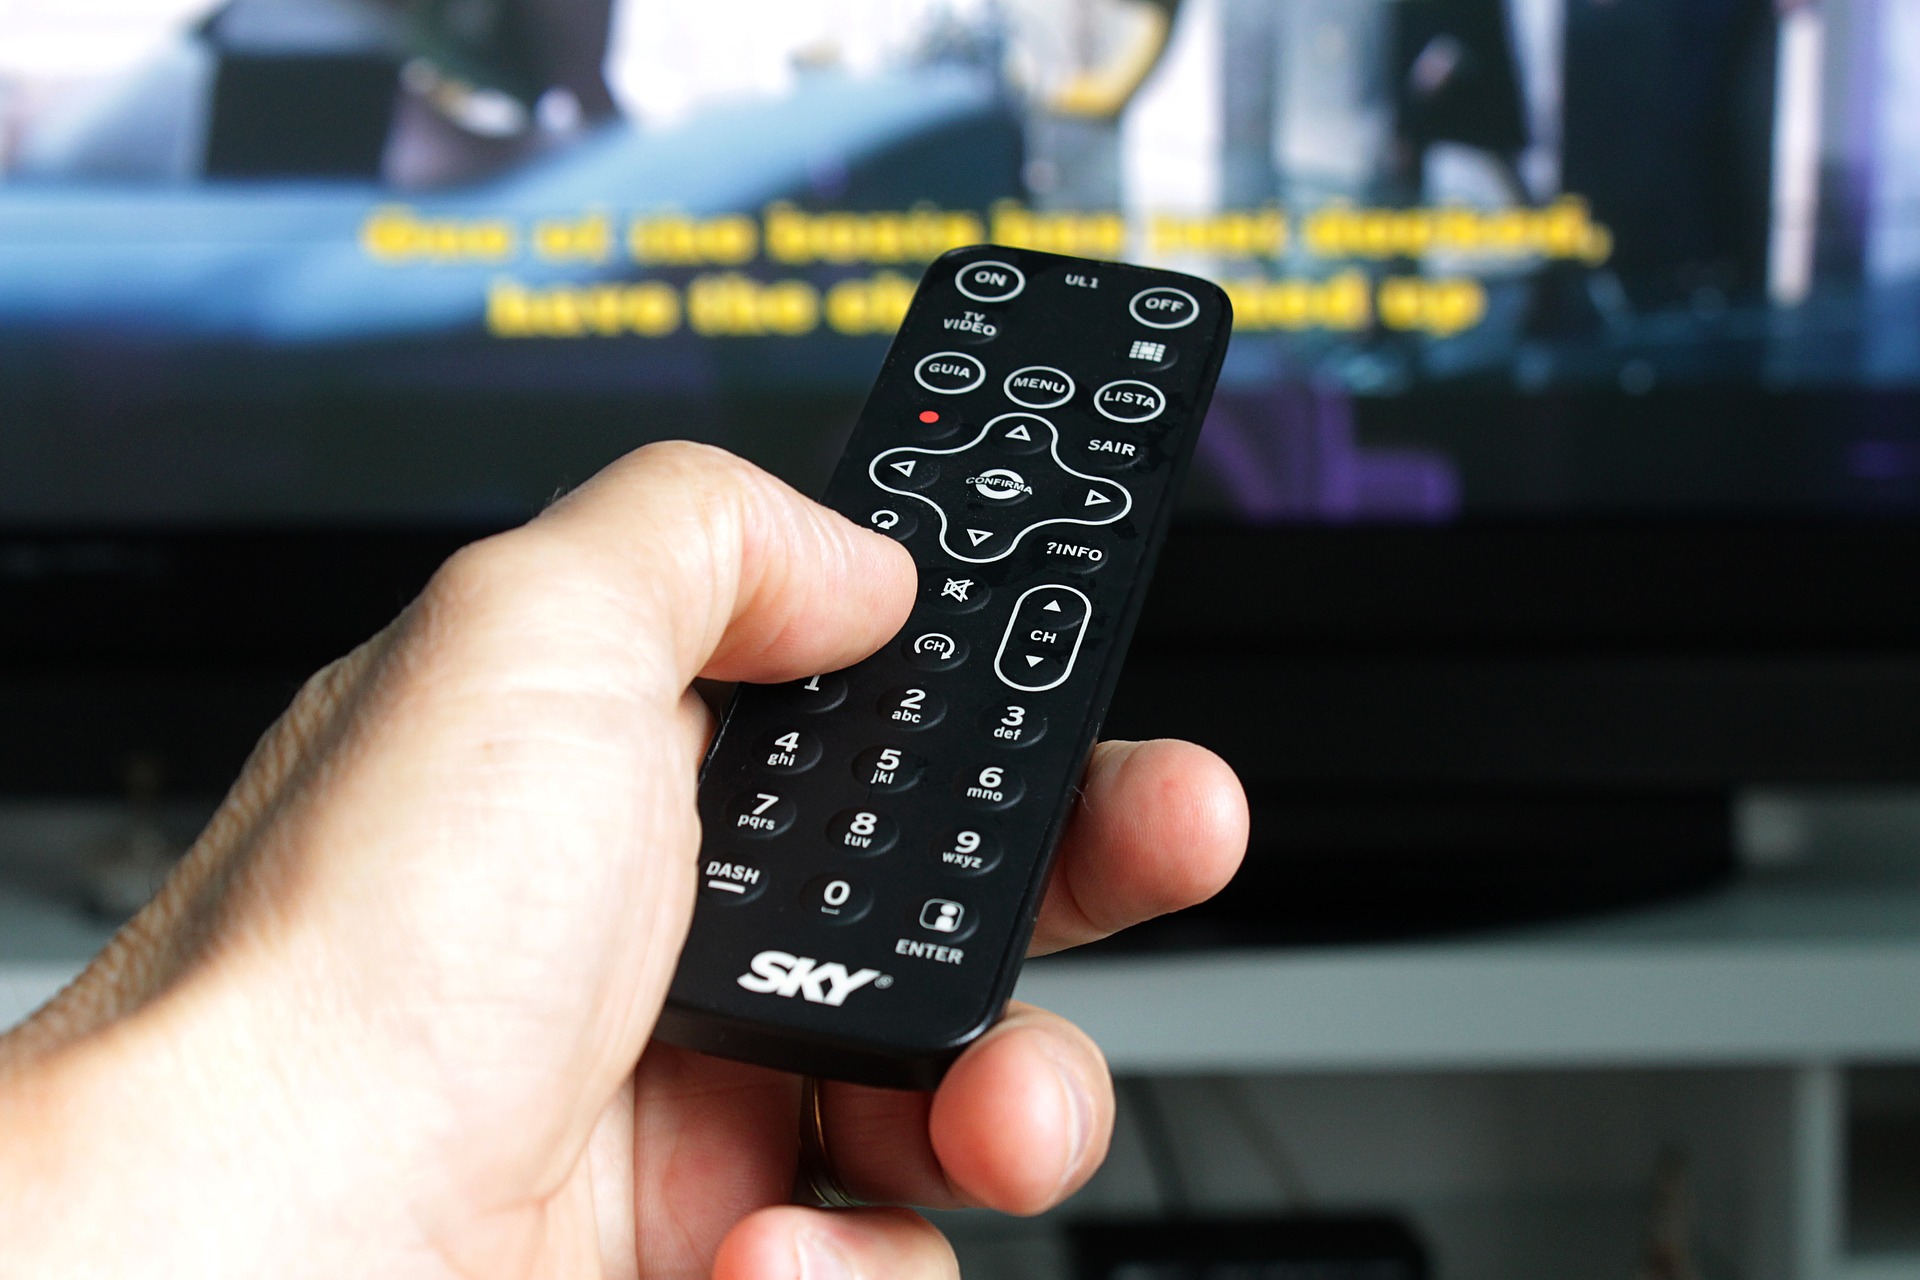 Changing Channels is now easy with remote control.